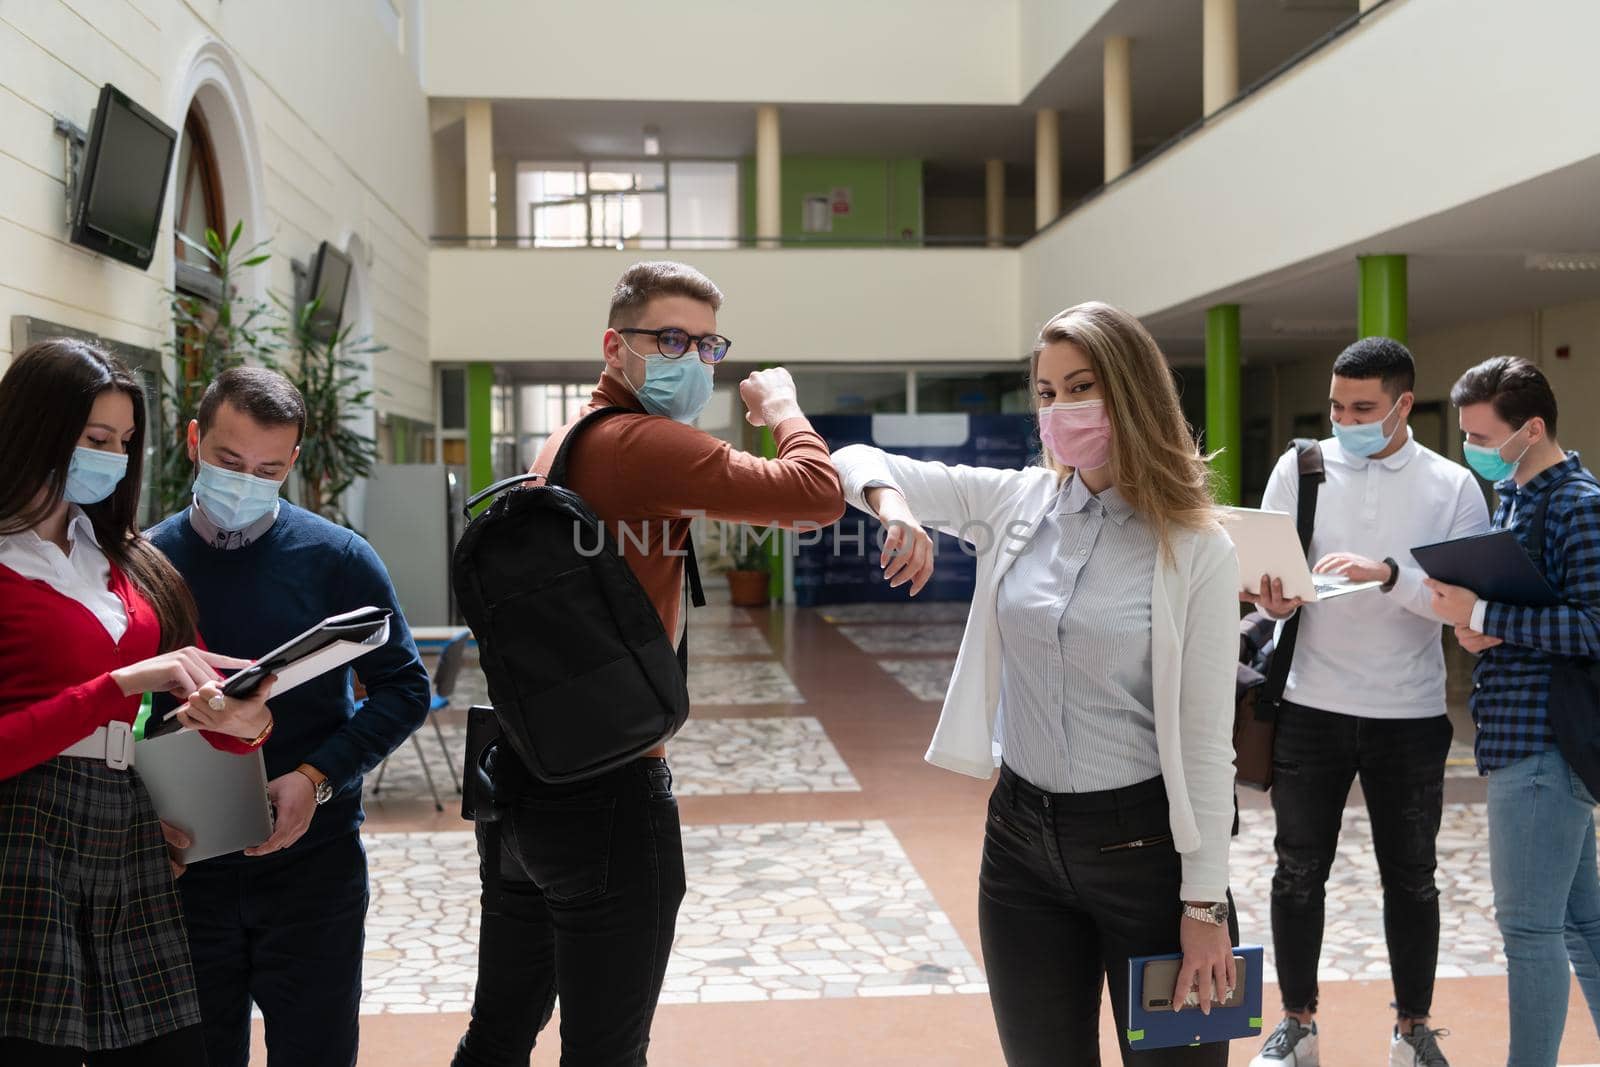 University students group greeting new normal coronavirus education lifestyle handshake and elbow bumping while wearing protective face masks